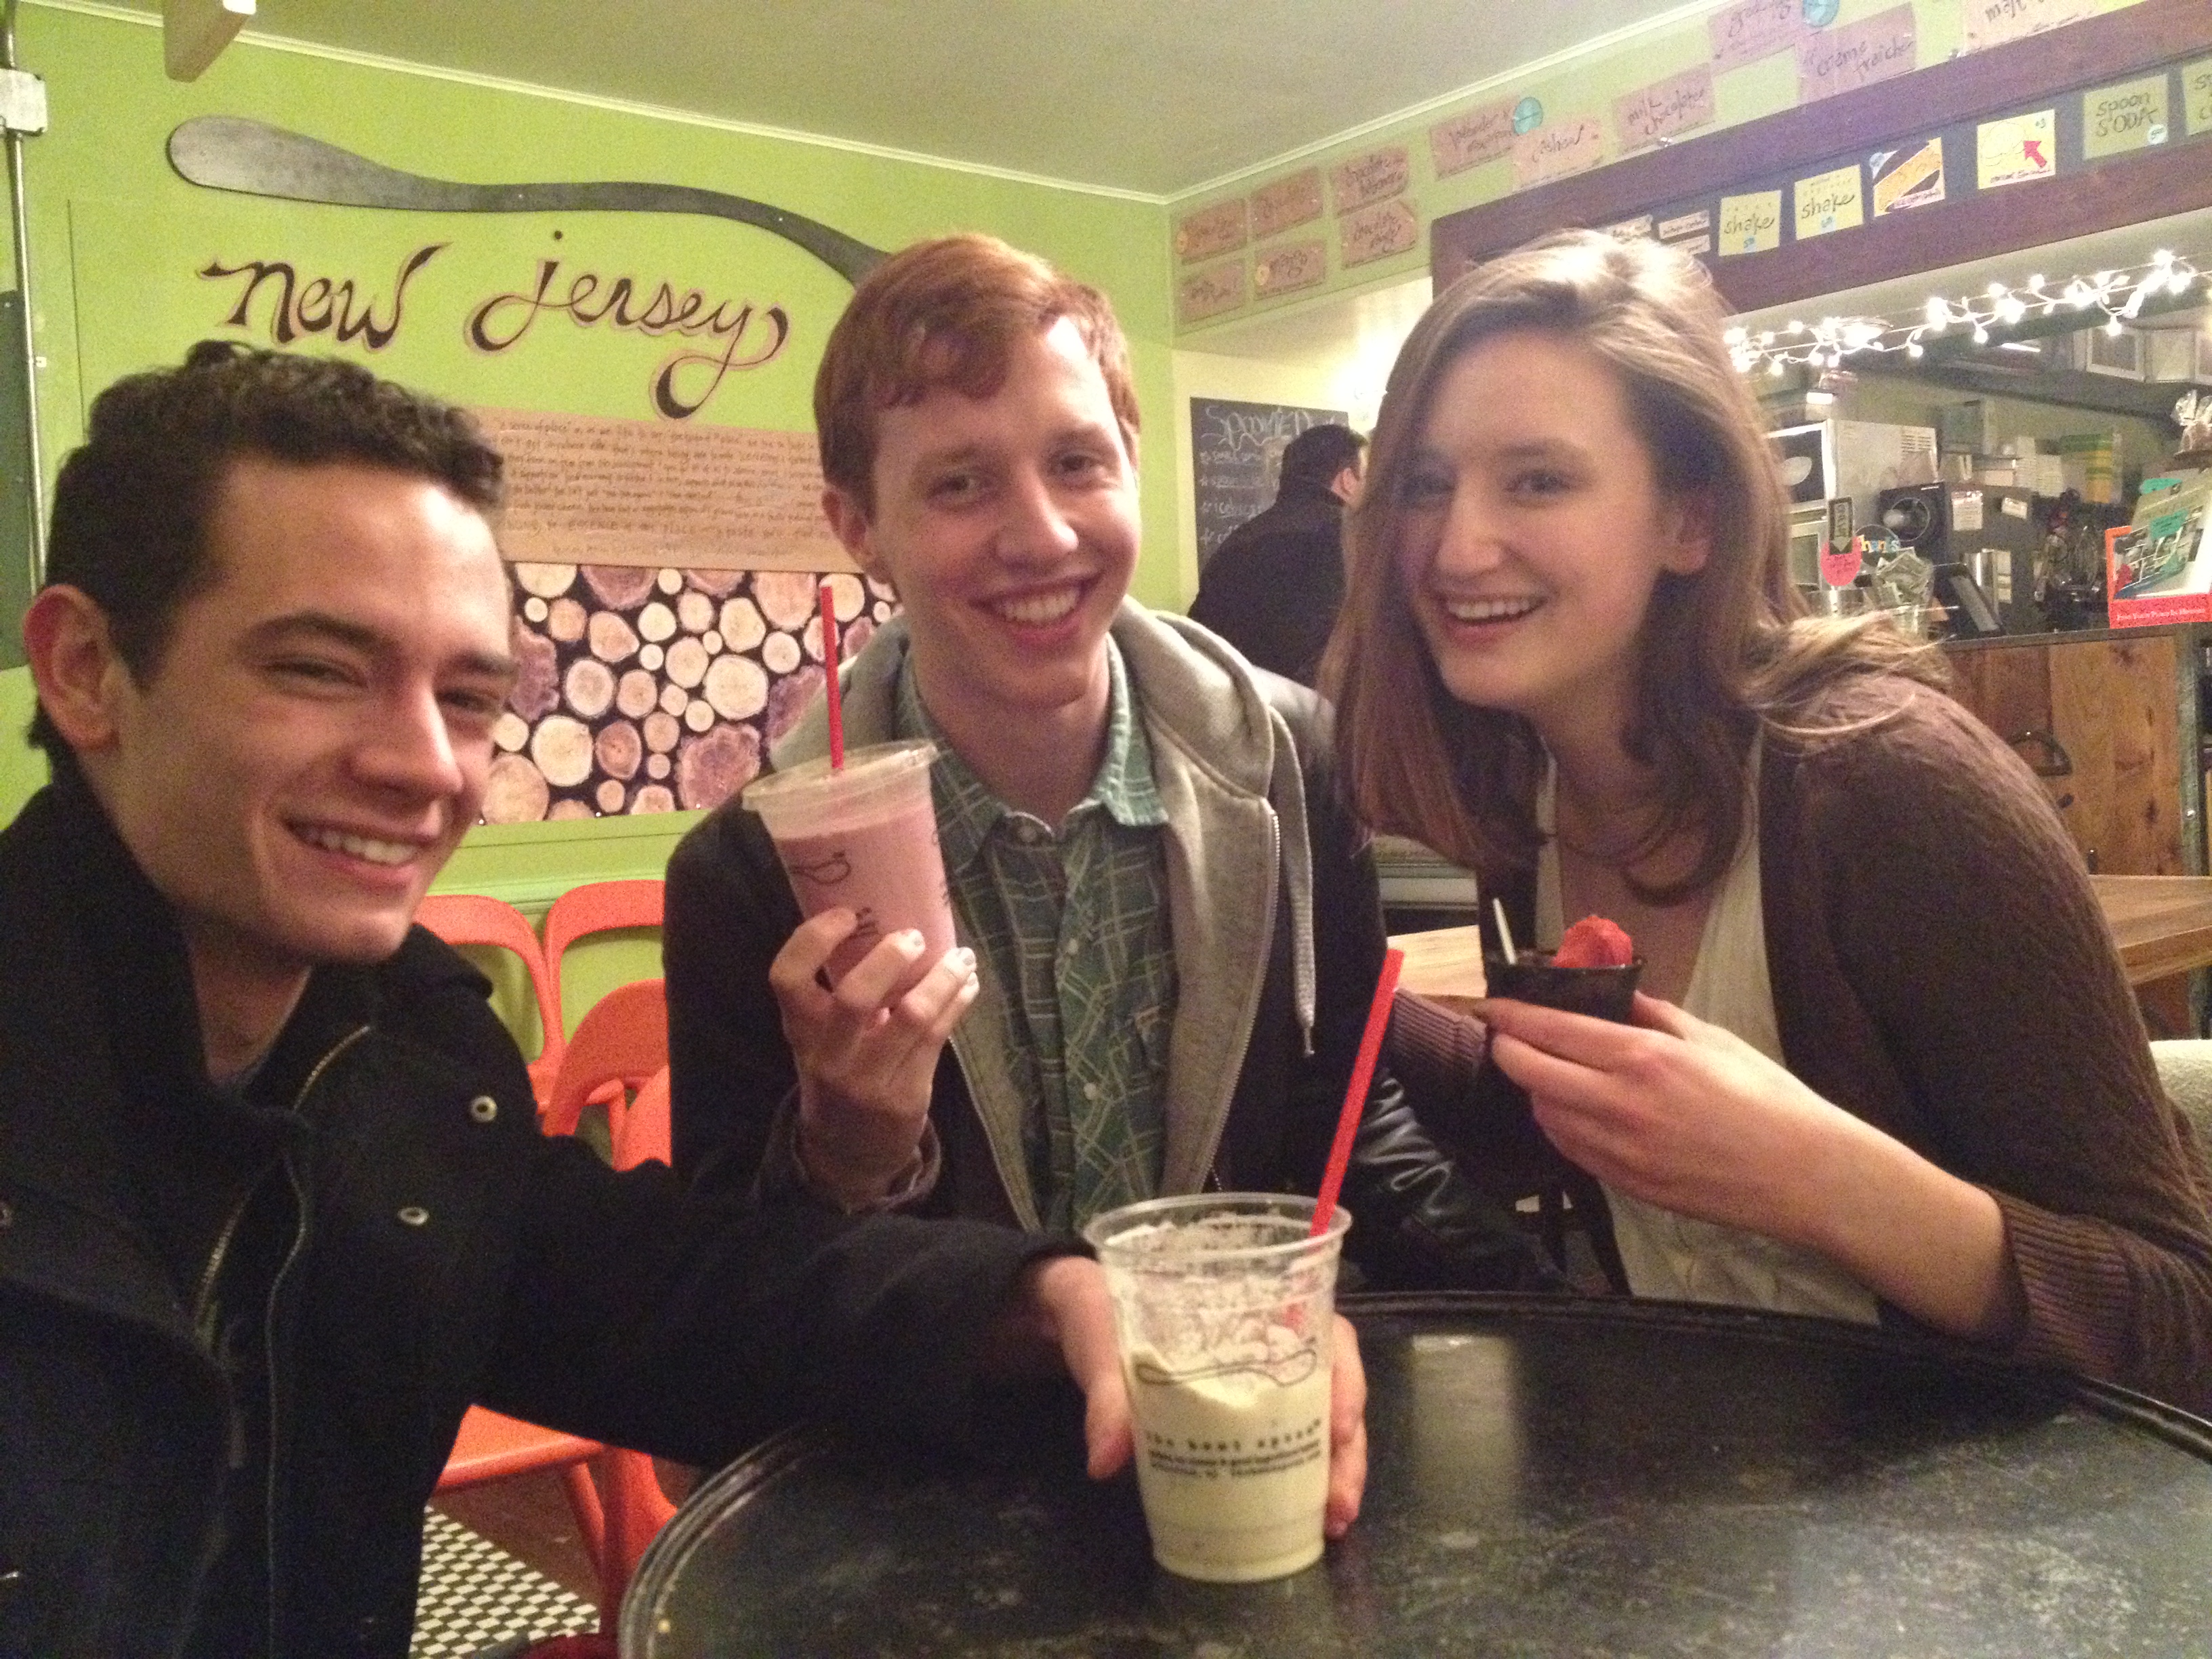 Three of my friends in Bent Spoon, showing off their milkshakes and ice cream.